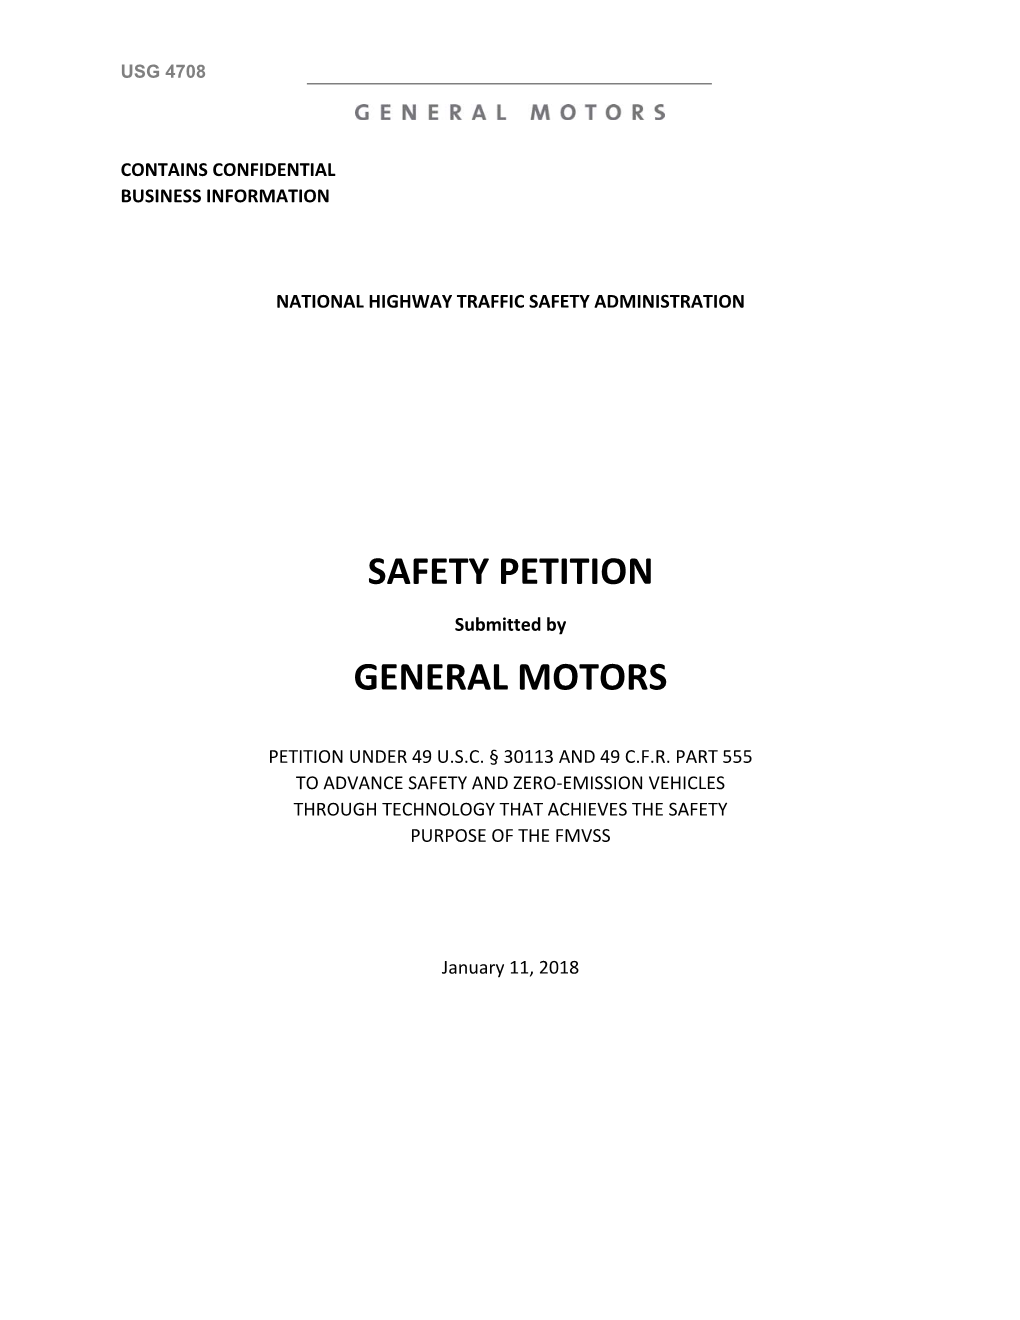 Safety Petition General Motors